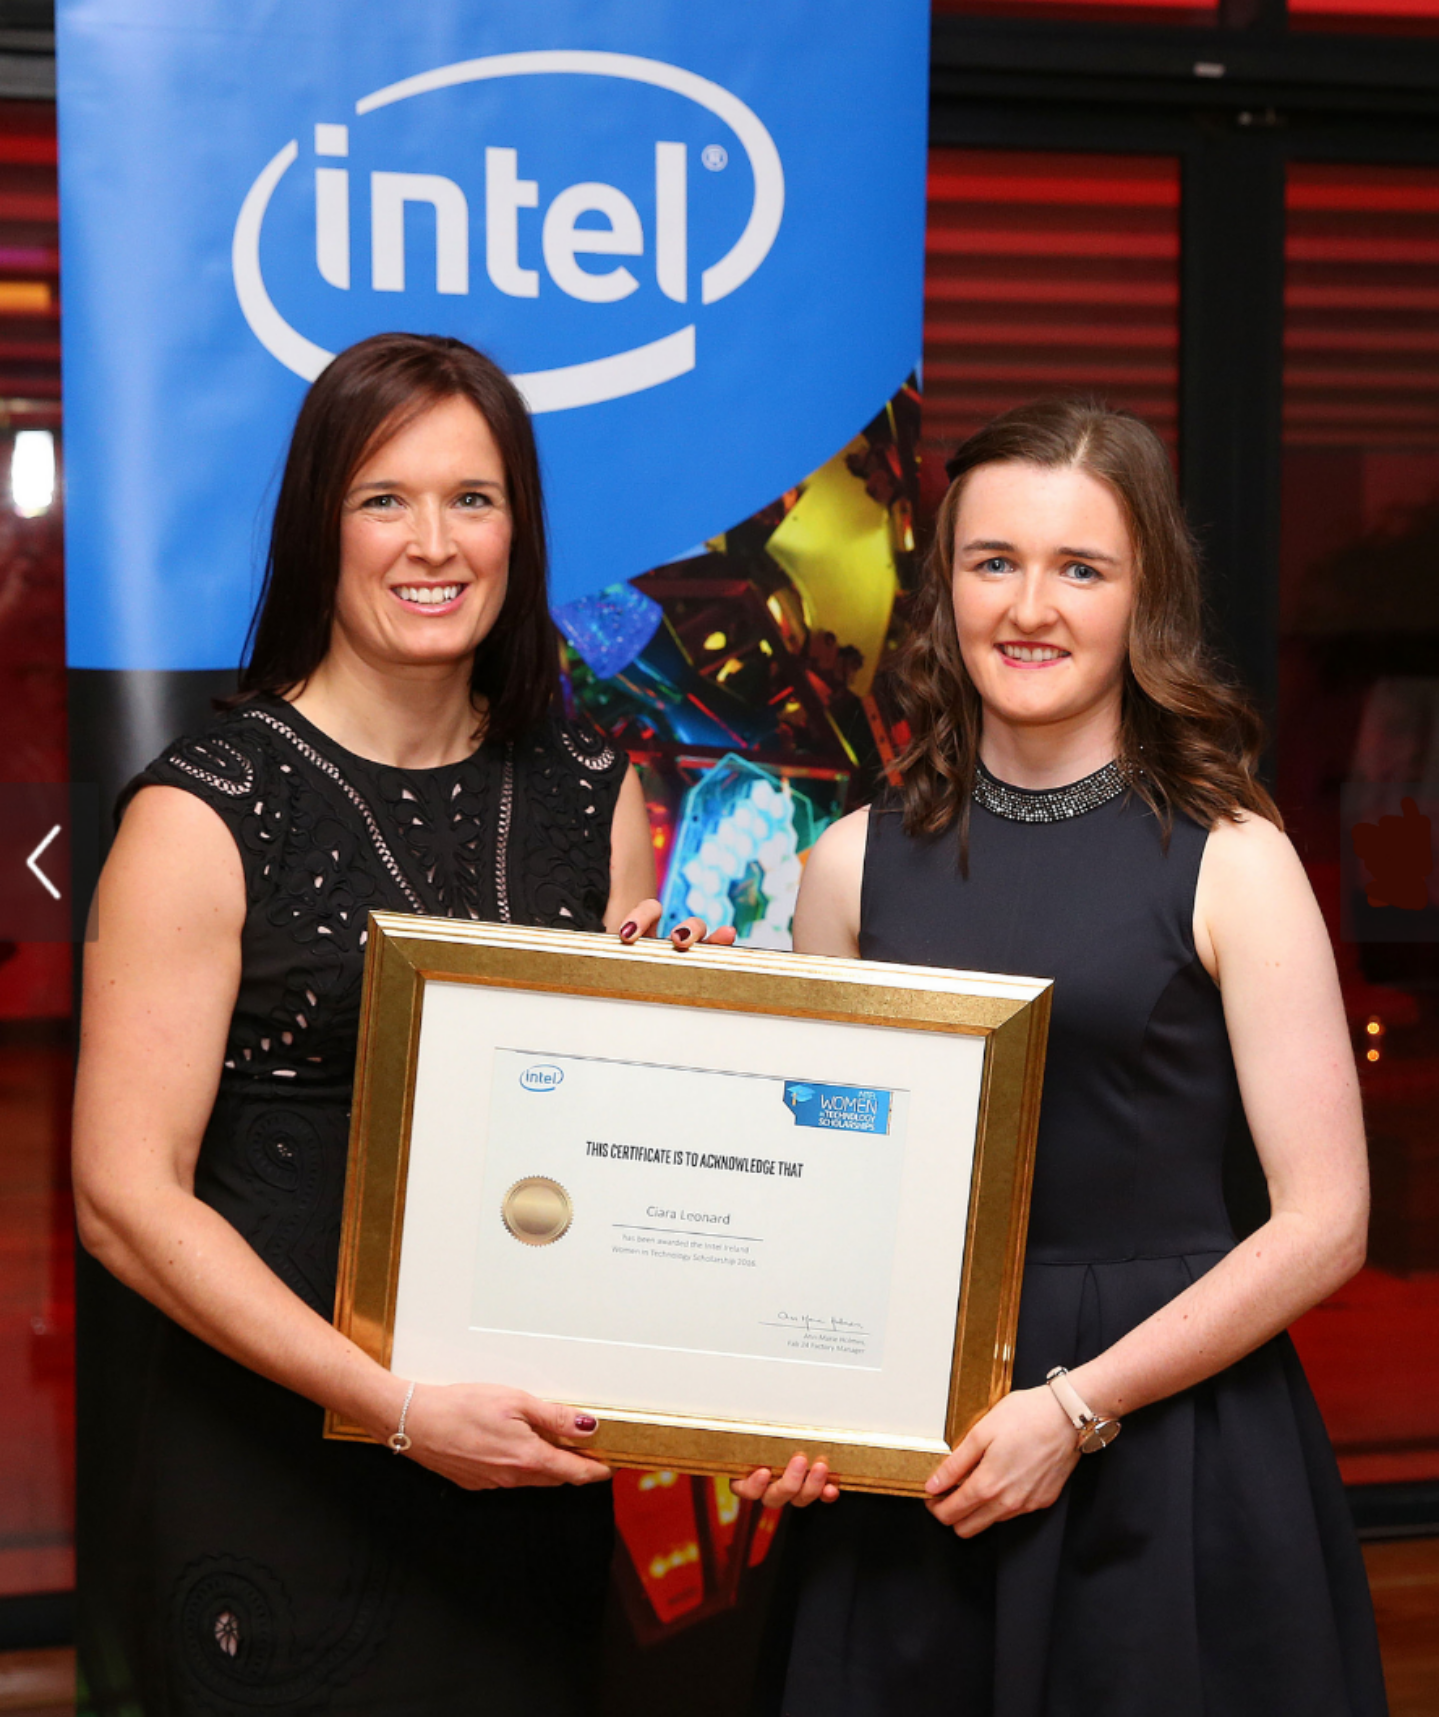 Process & Chemical Engineering First Year Student, Ciara Leonard awarded Intel Women in Technology Scholarship 2016